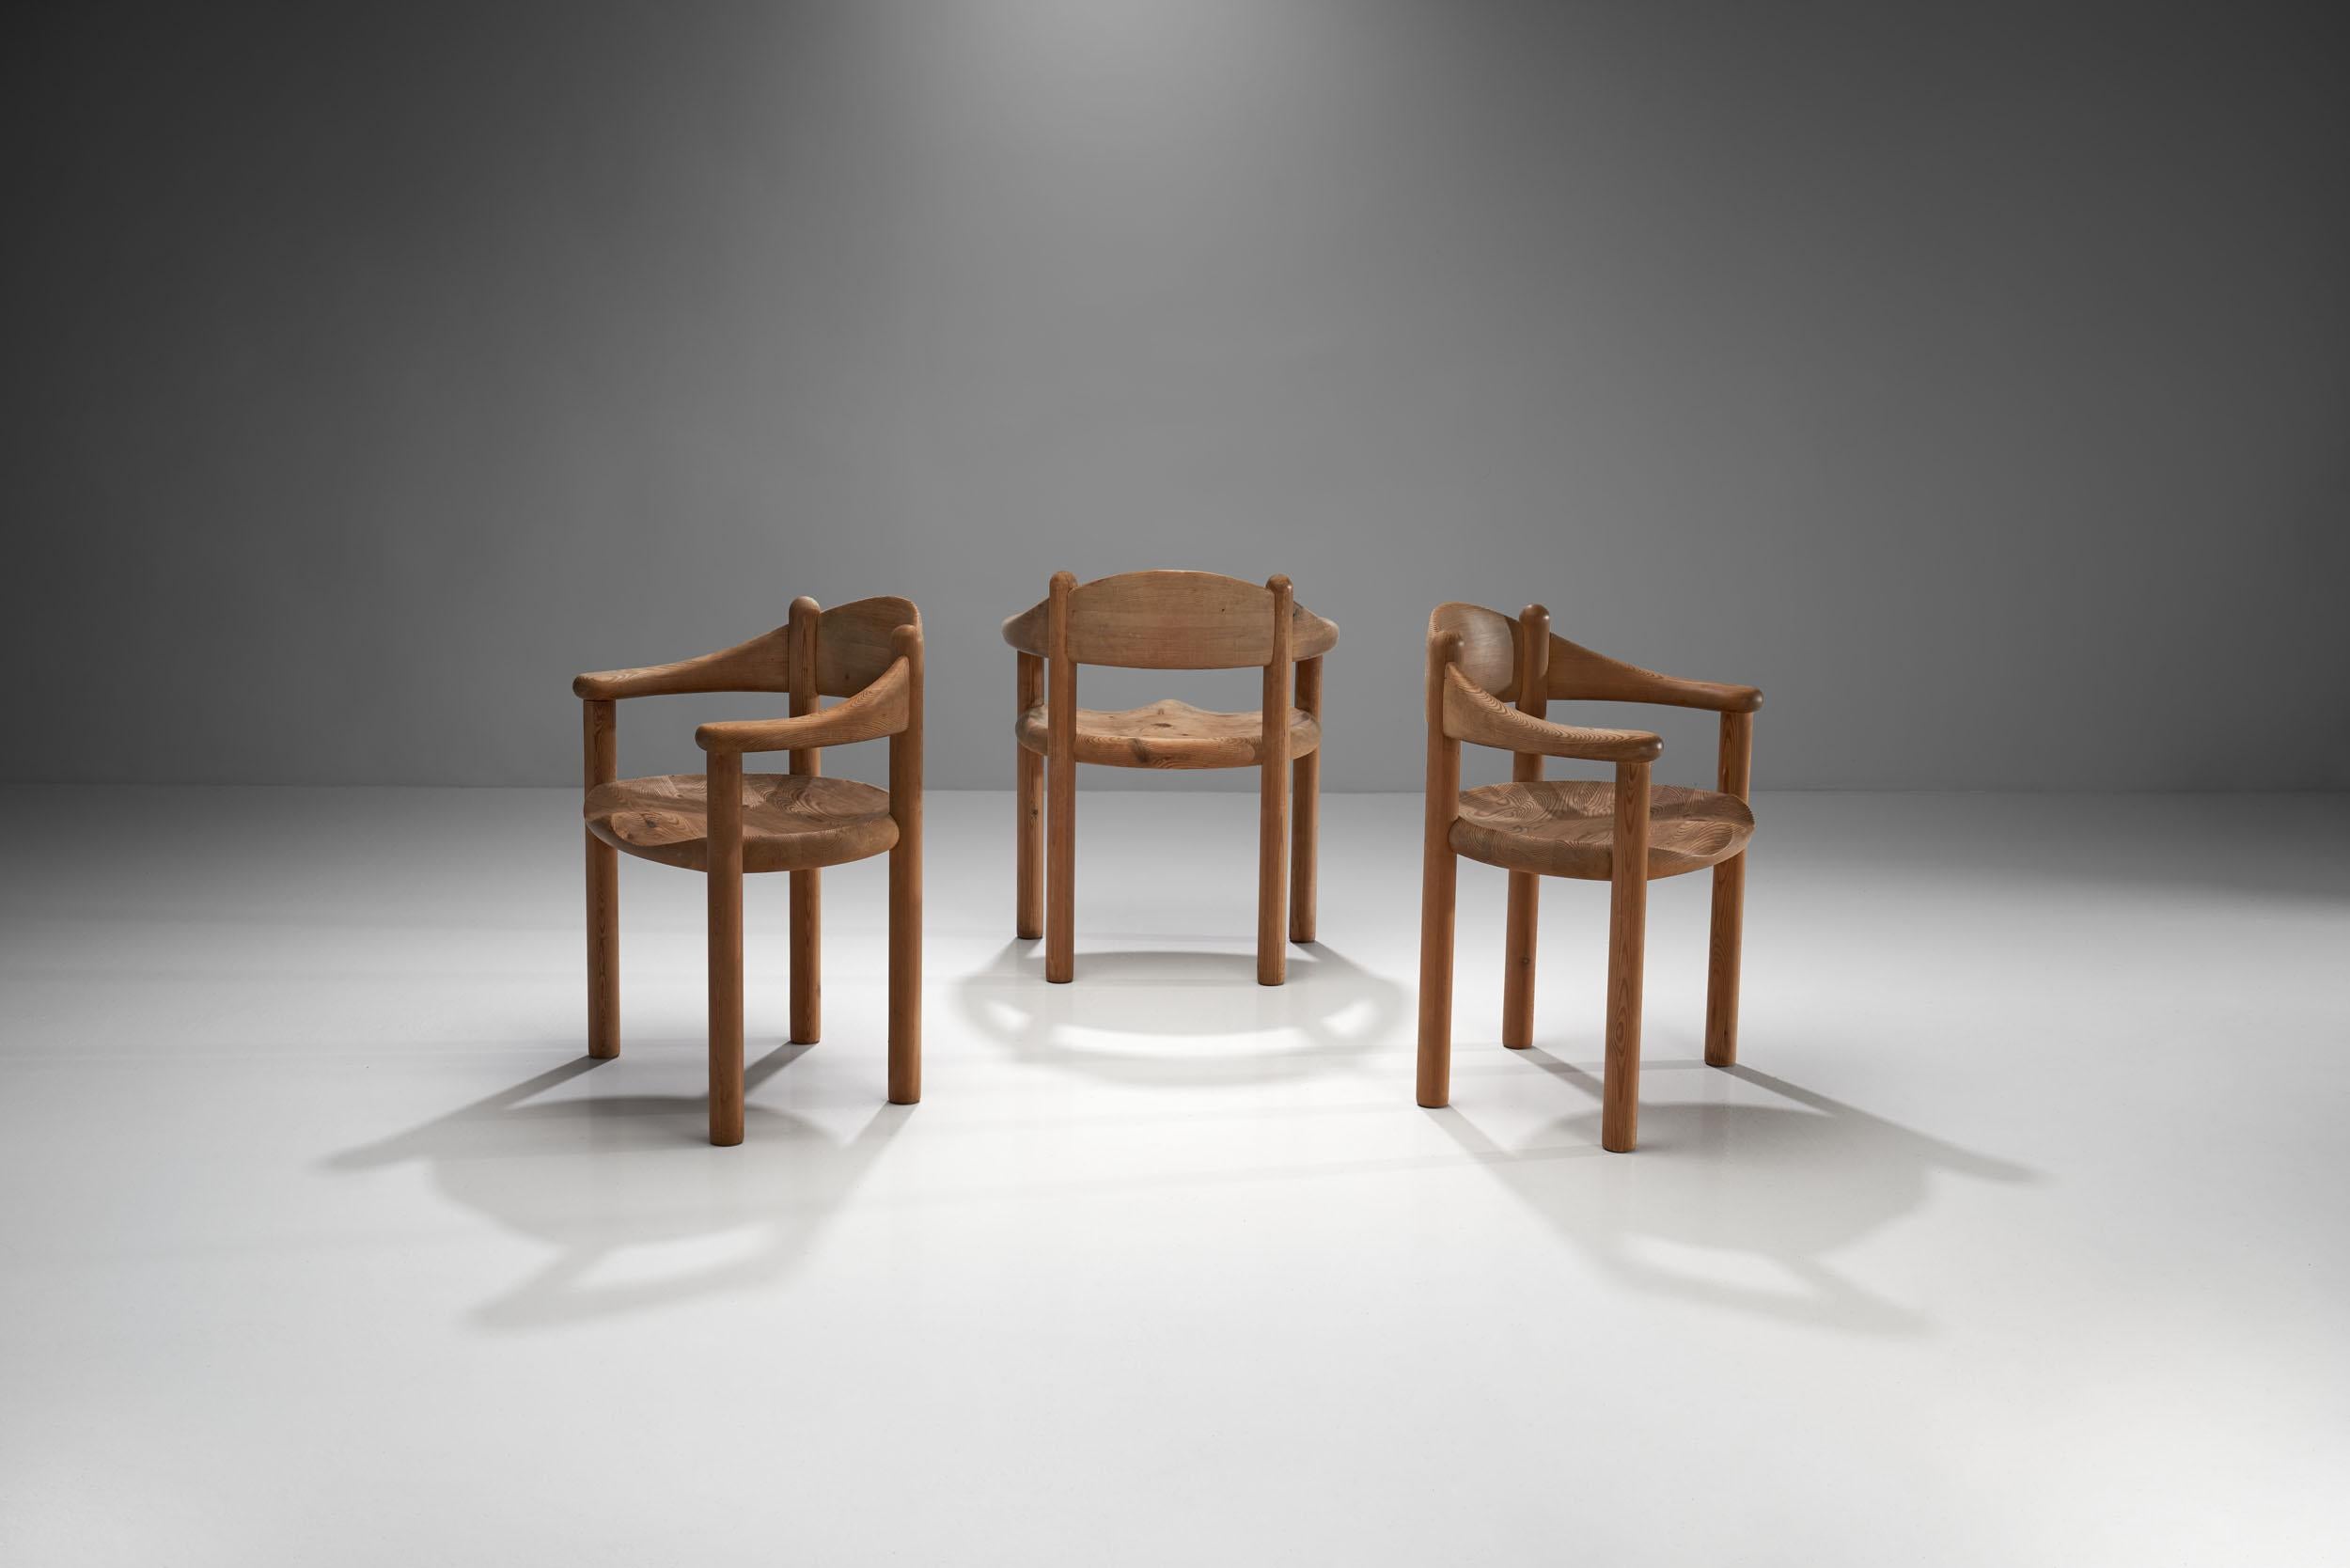 Set of three Rainer Daumiller chairs made of solid pine, manufactured by Hirtshals Savværk (Hirtshals Sawmill) Møbler in Denmark in the 1970s. 

The set is made according to Scandinavian quality and design. The pine is crafted to be as